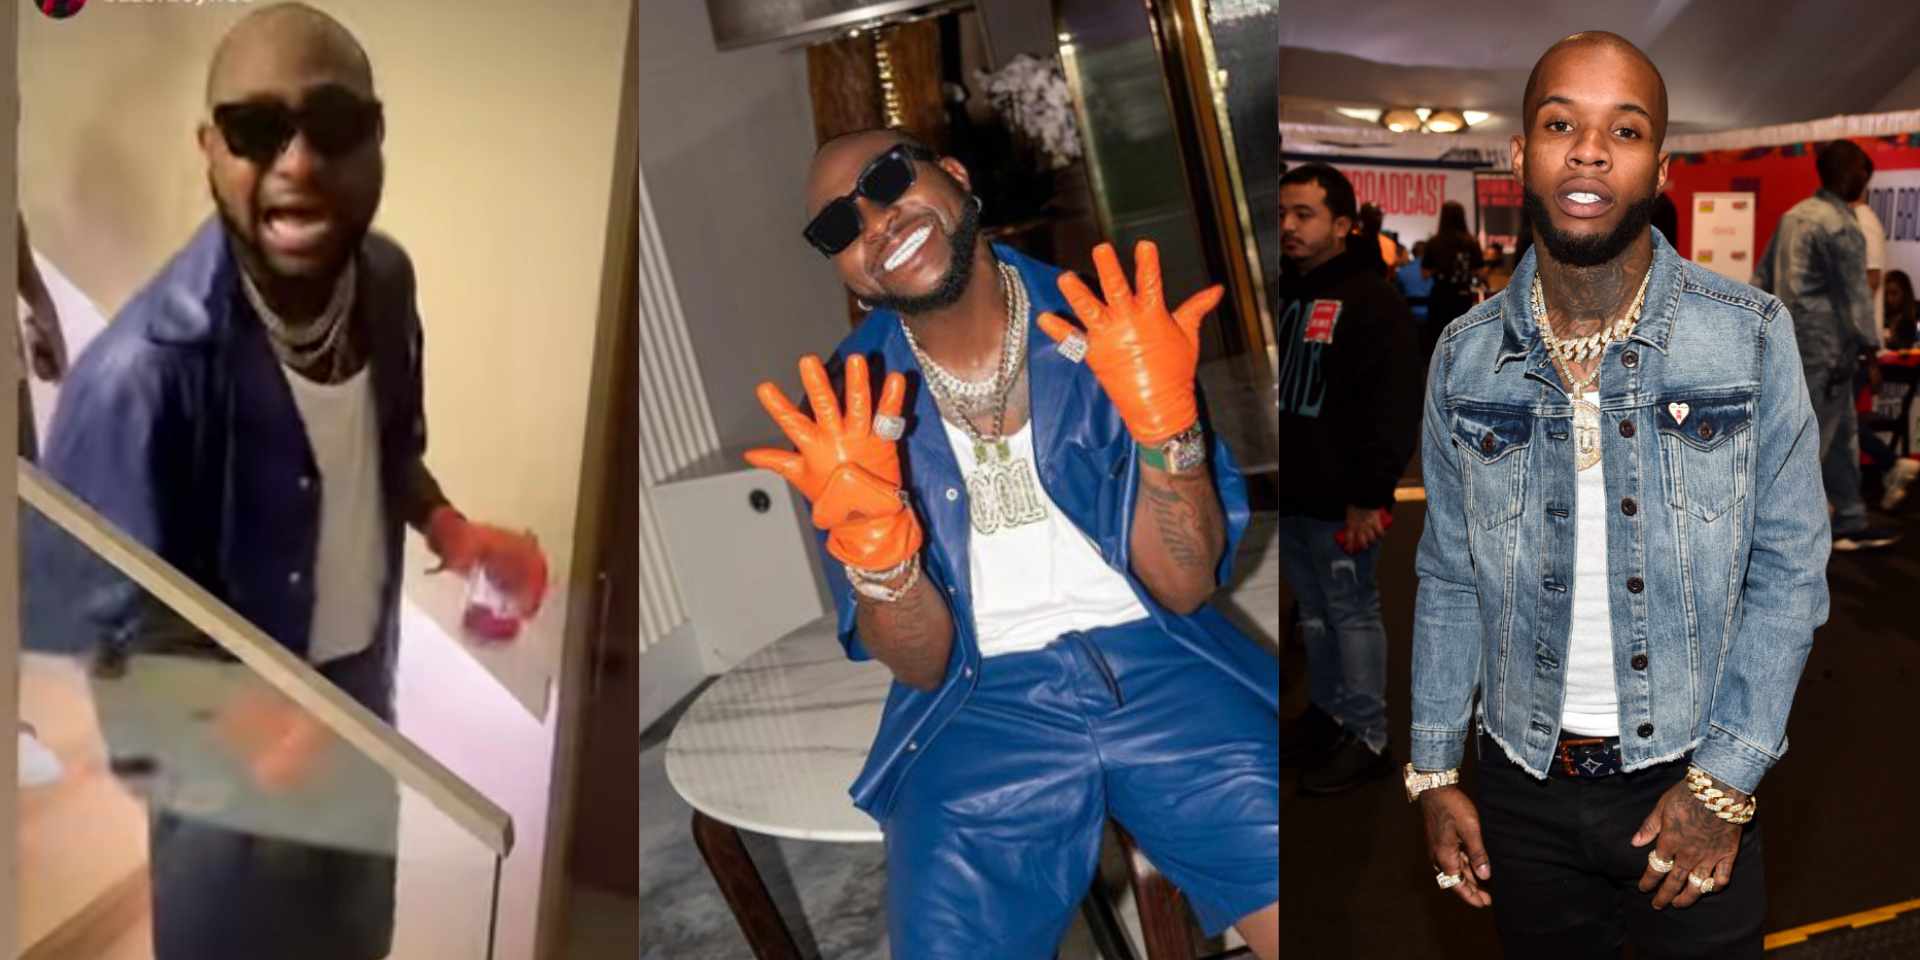 "I don't care what anybody says, Davido is one of the greatest artistes in the world" - Tory Lanez eulogizes singer [Video]